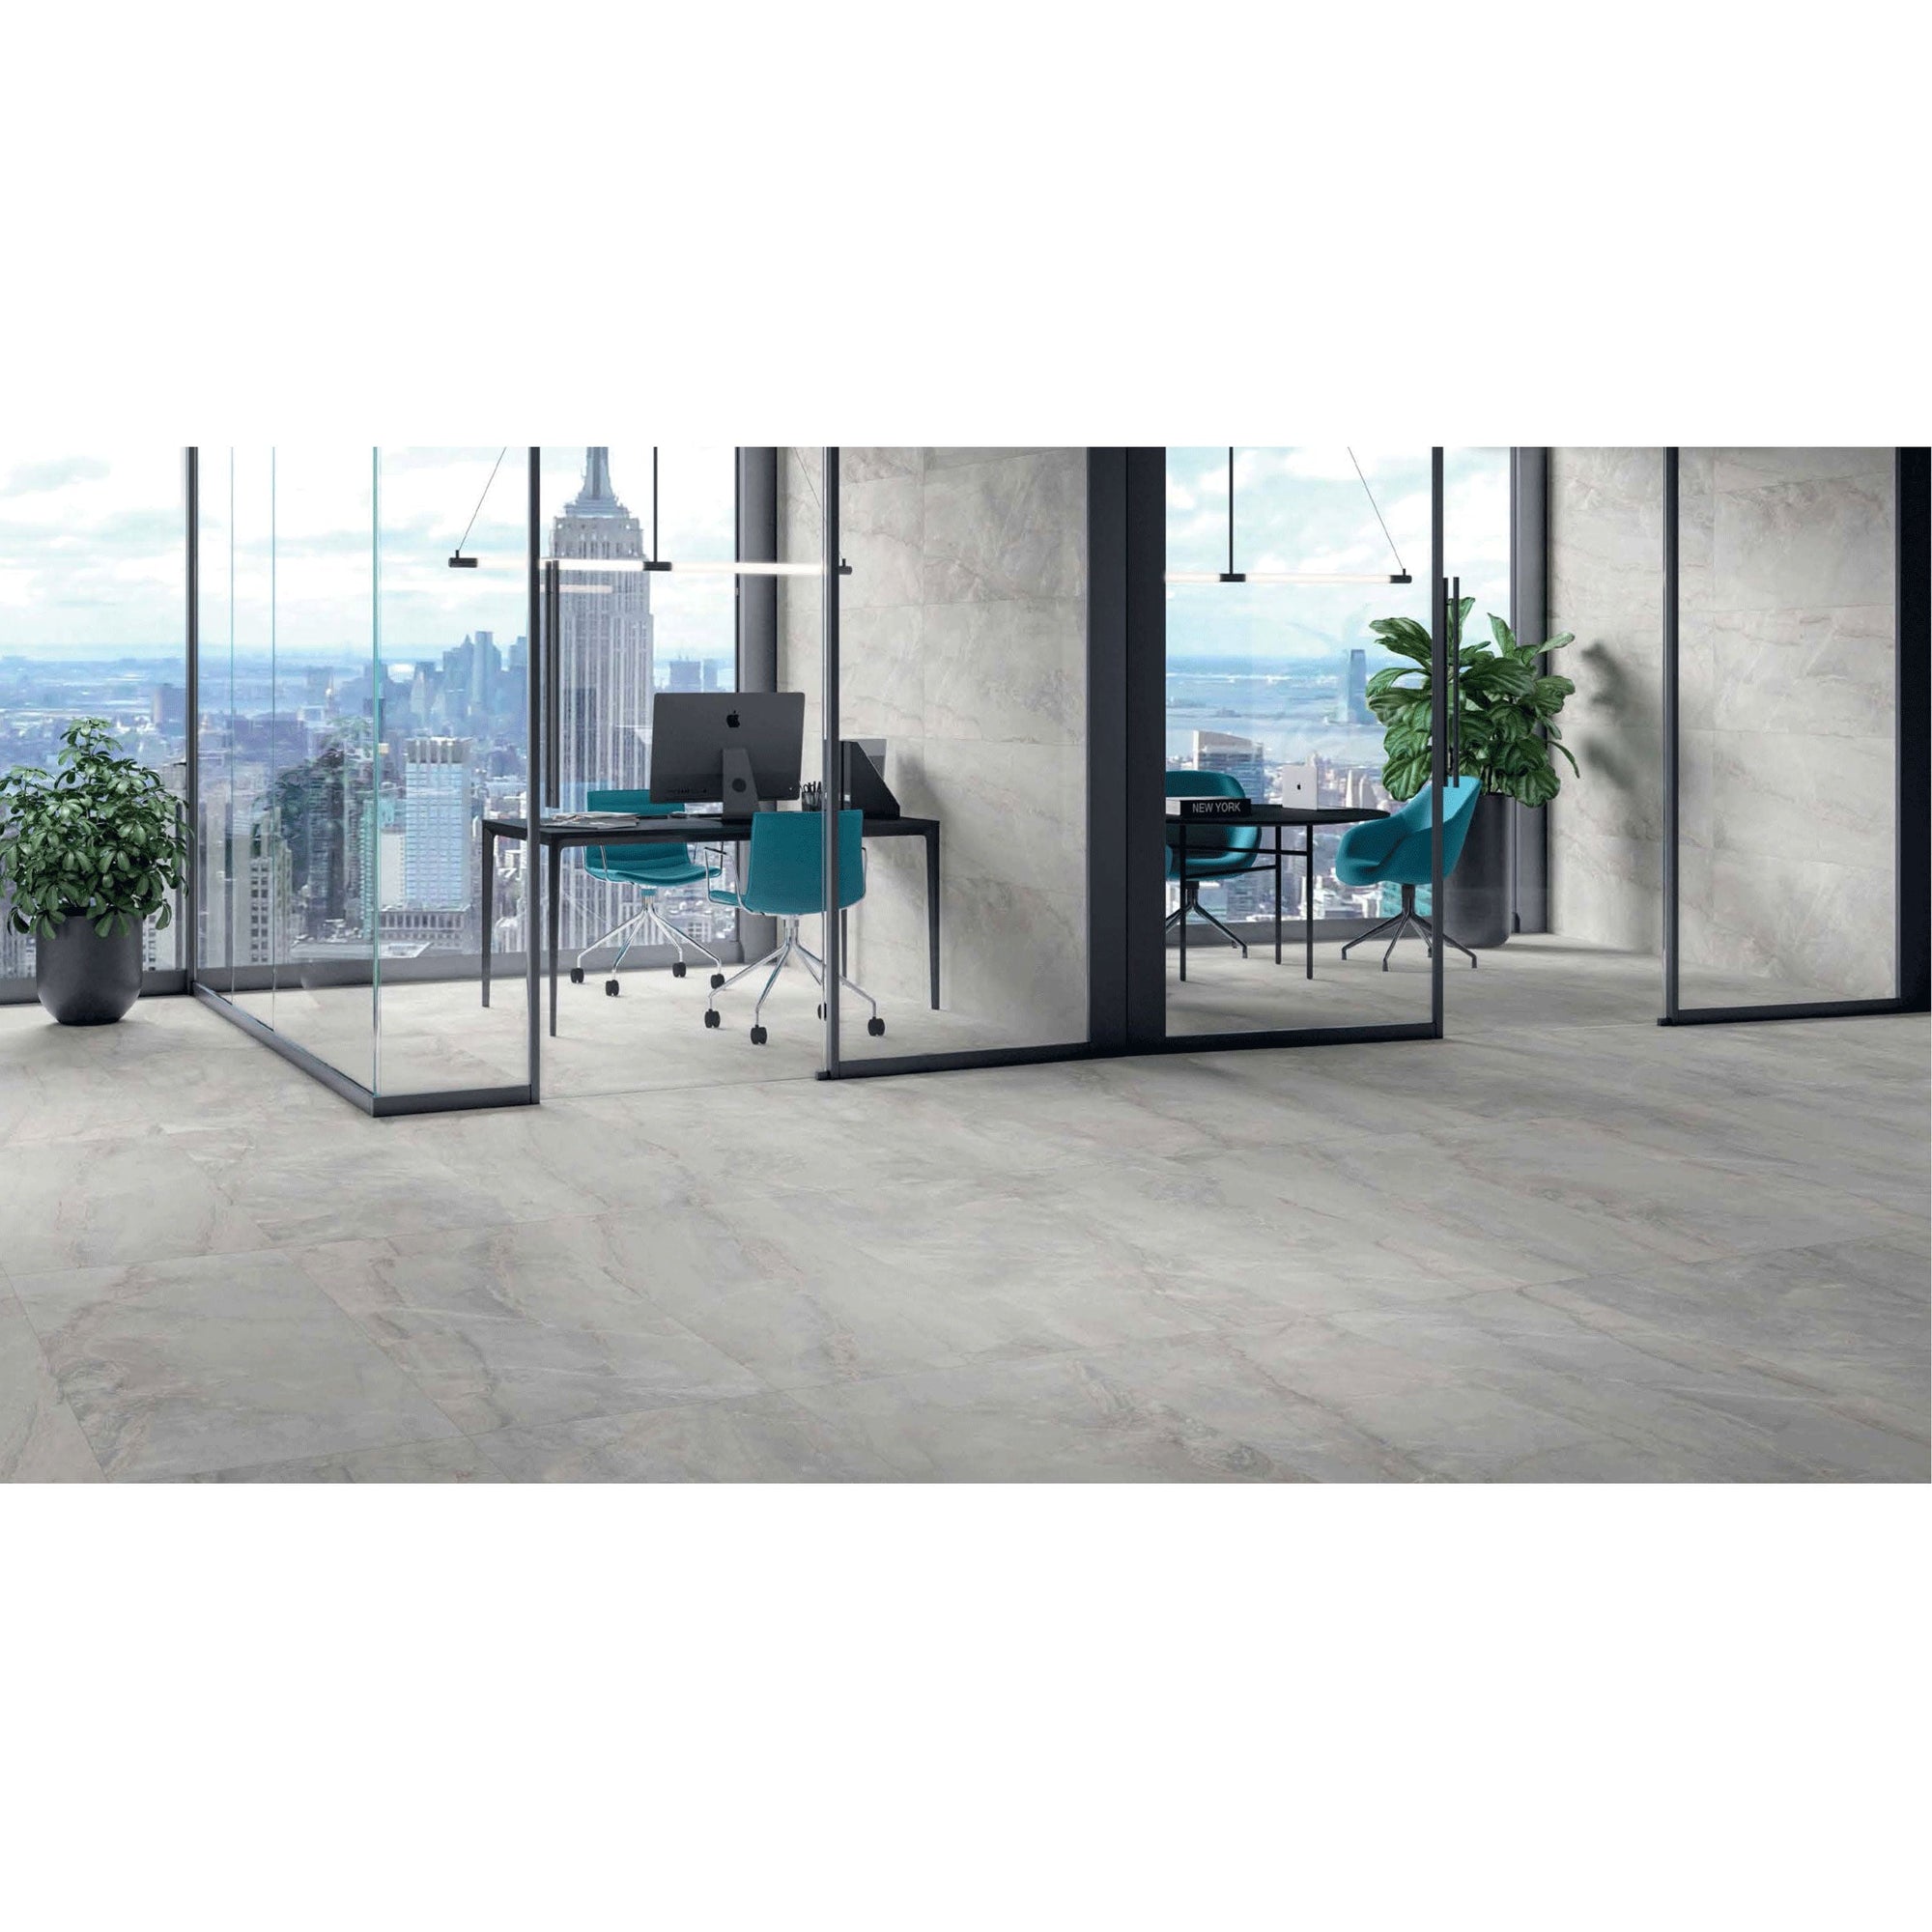 Cobsa - Sylvia Series 12 in. x 24 in. Rectified Porcelain Tile - Polished Light Grey